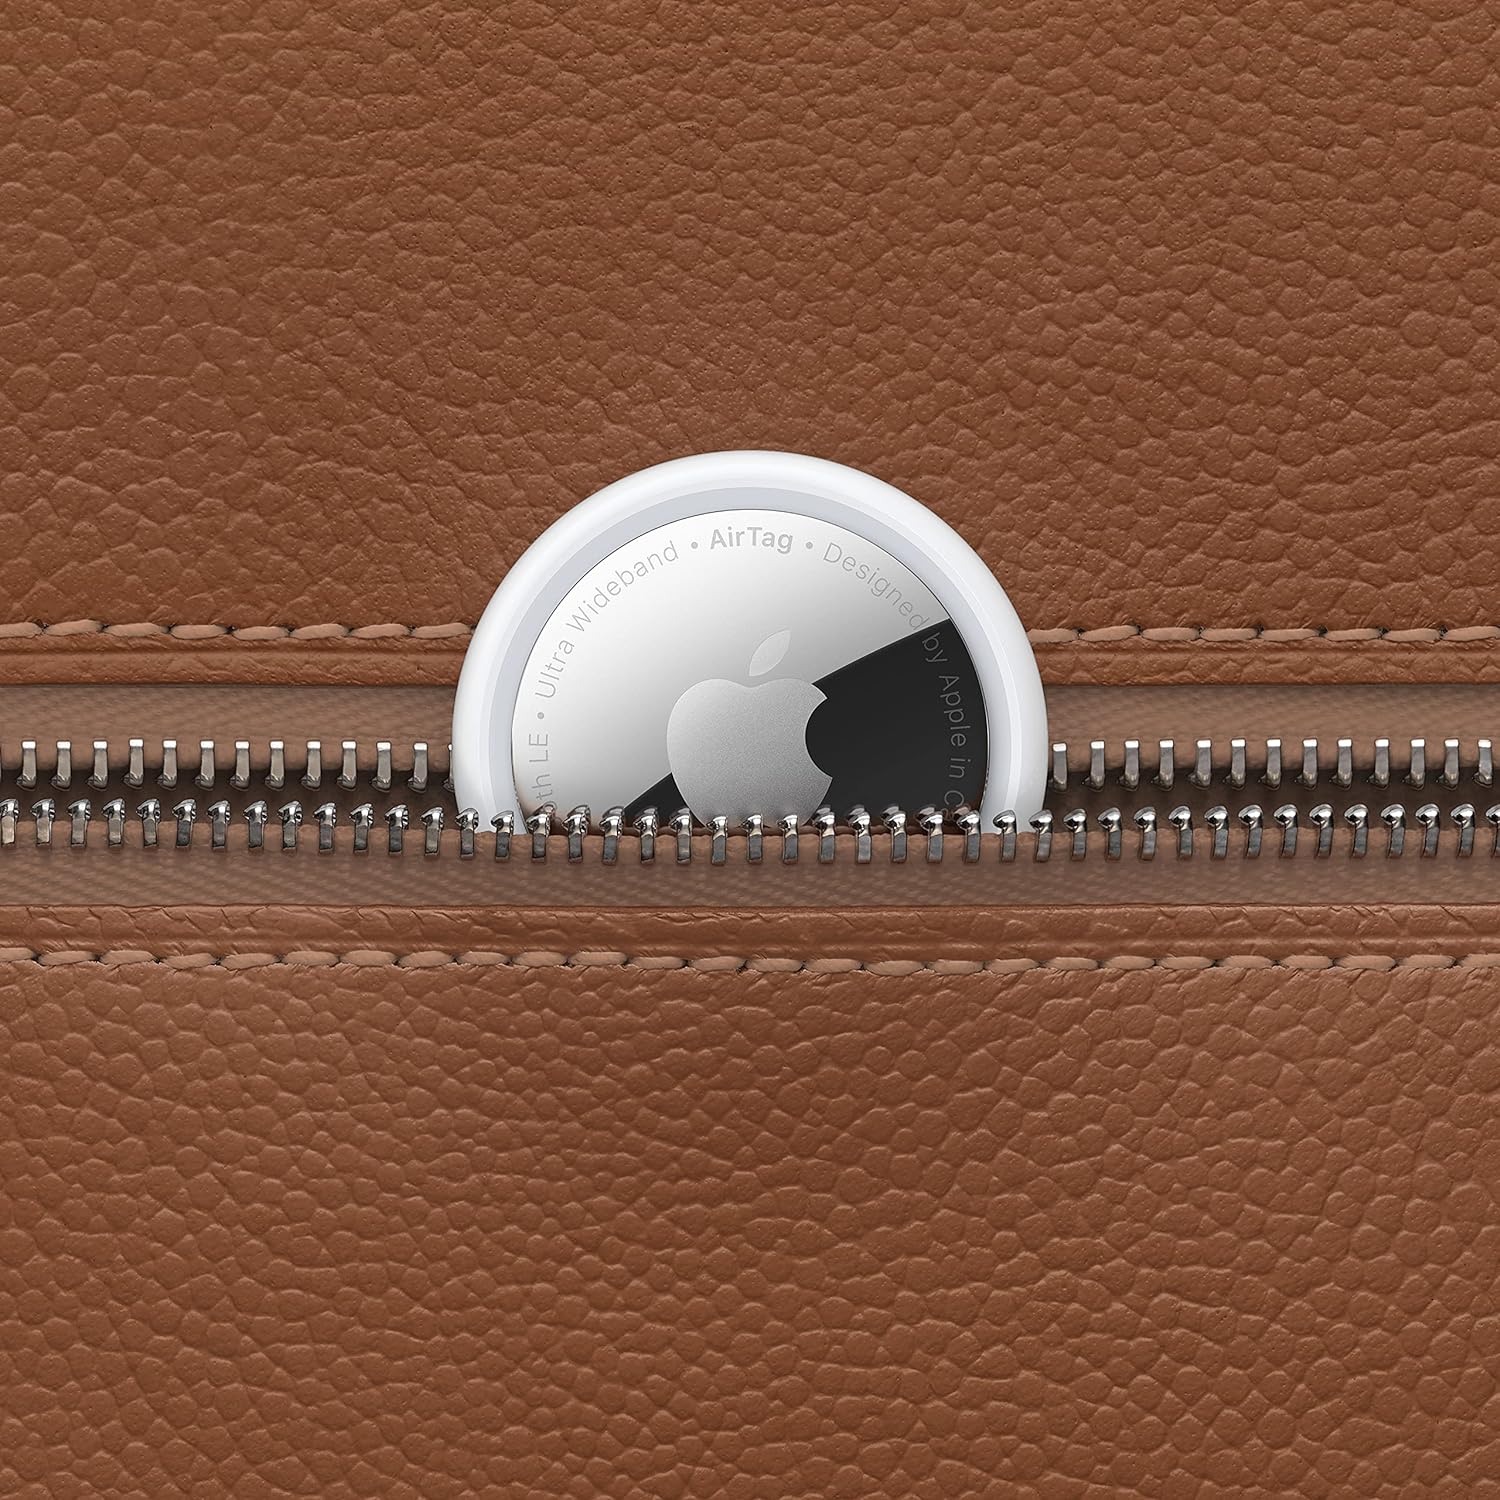 This image features an Apple AirTag, a small tracking device, placed over a textured brown leather surface with a metal zipper partly open. The AirTag is shown with its white side up, displaying the Apple logo, and text surrounding the logo providing information about the product, including mentions of 